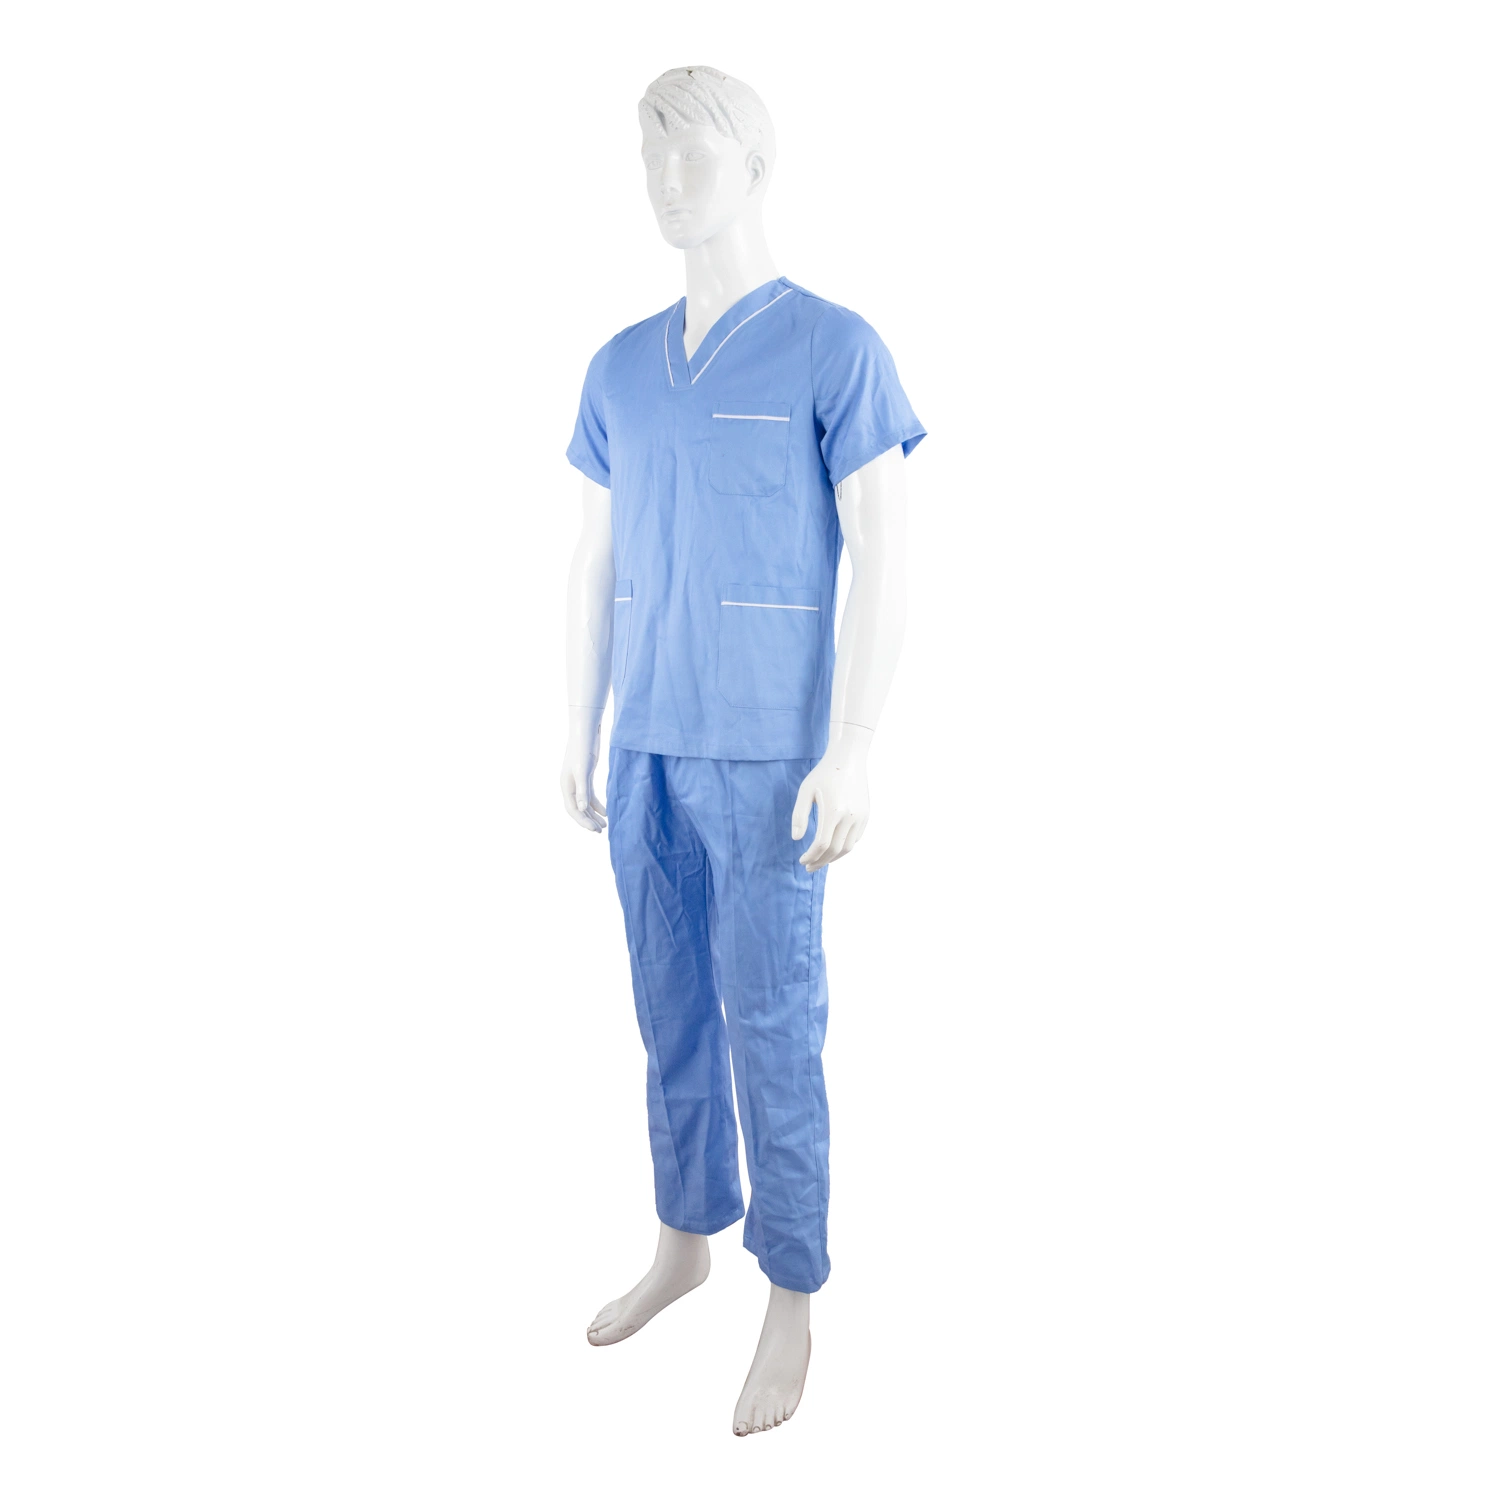 Washable and Disposable Surgeons Workwear Uniform Surgery Wear Scrubs Clothing Suit